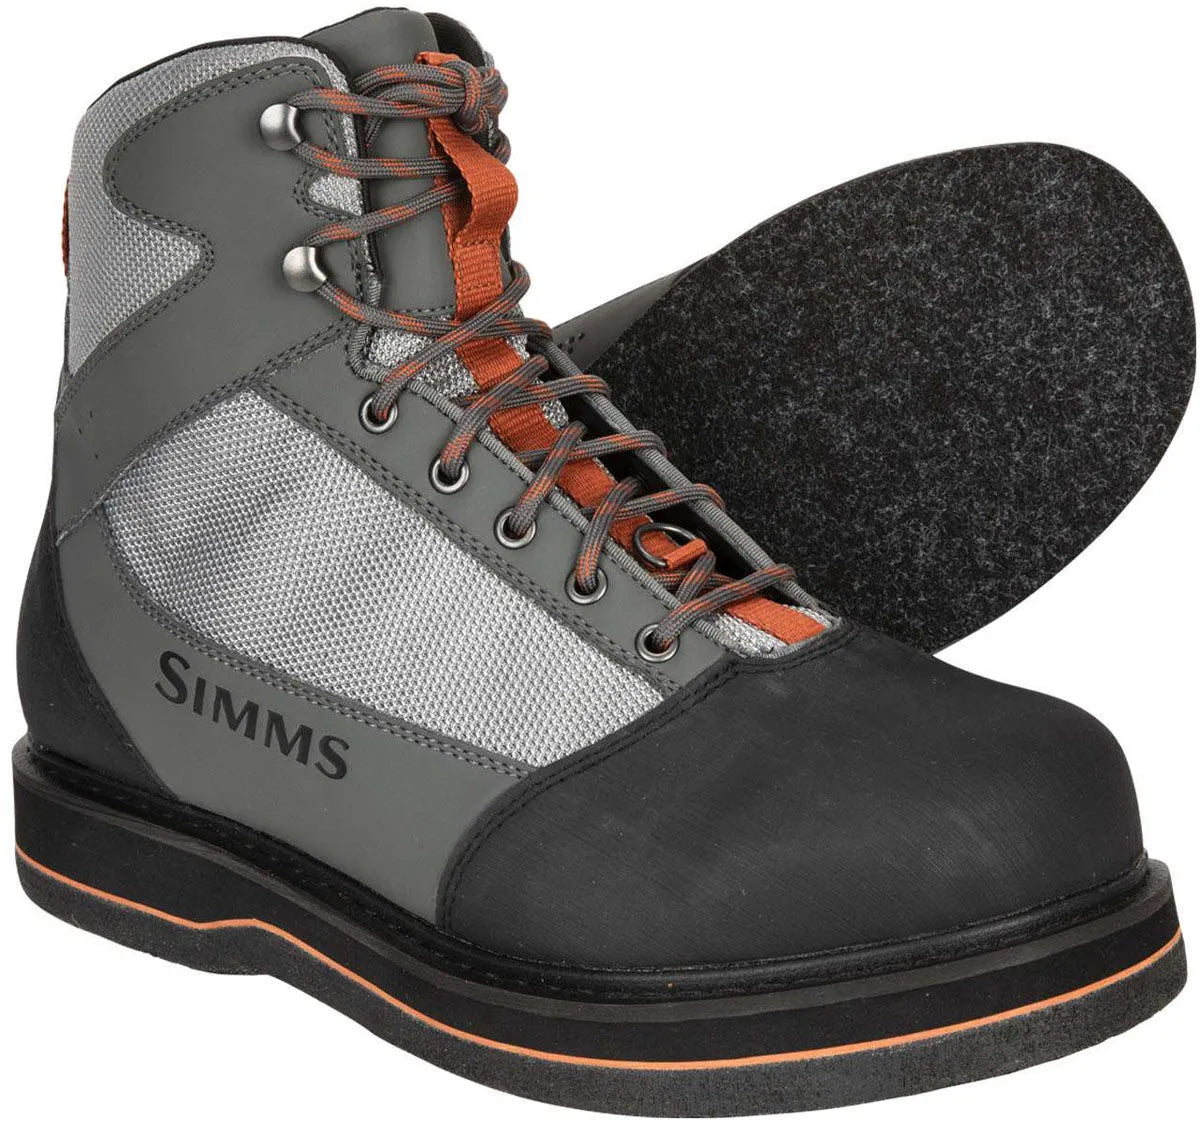 Tributary Men's Fishing Boots